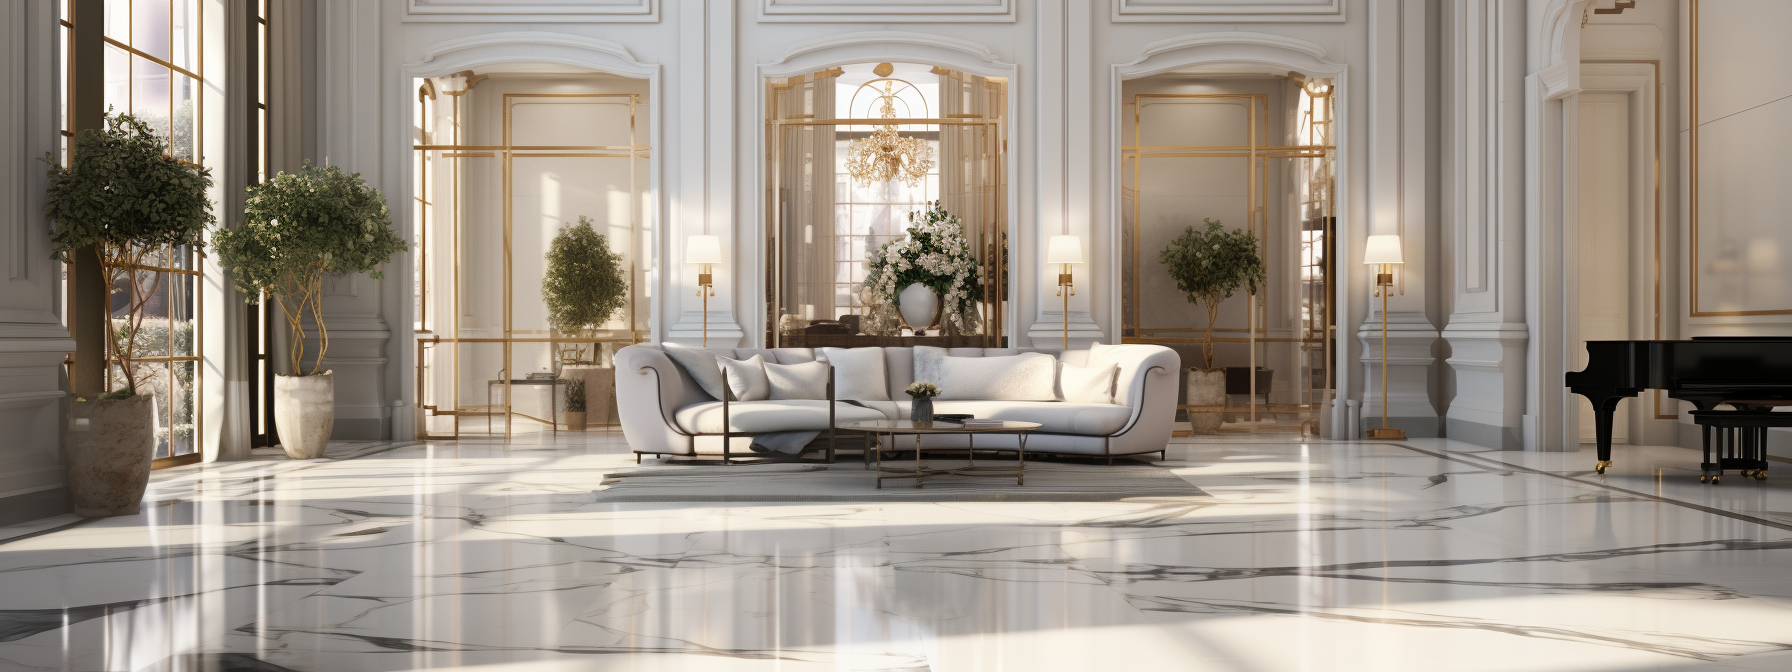 Specialized Cleaning Methods for Luxurious Marble Floors